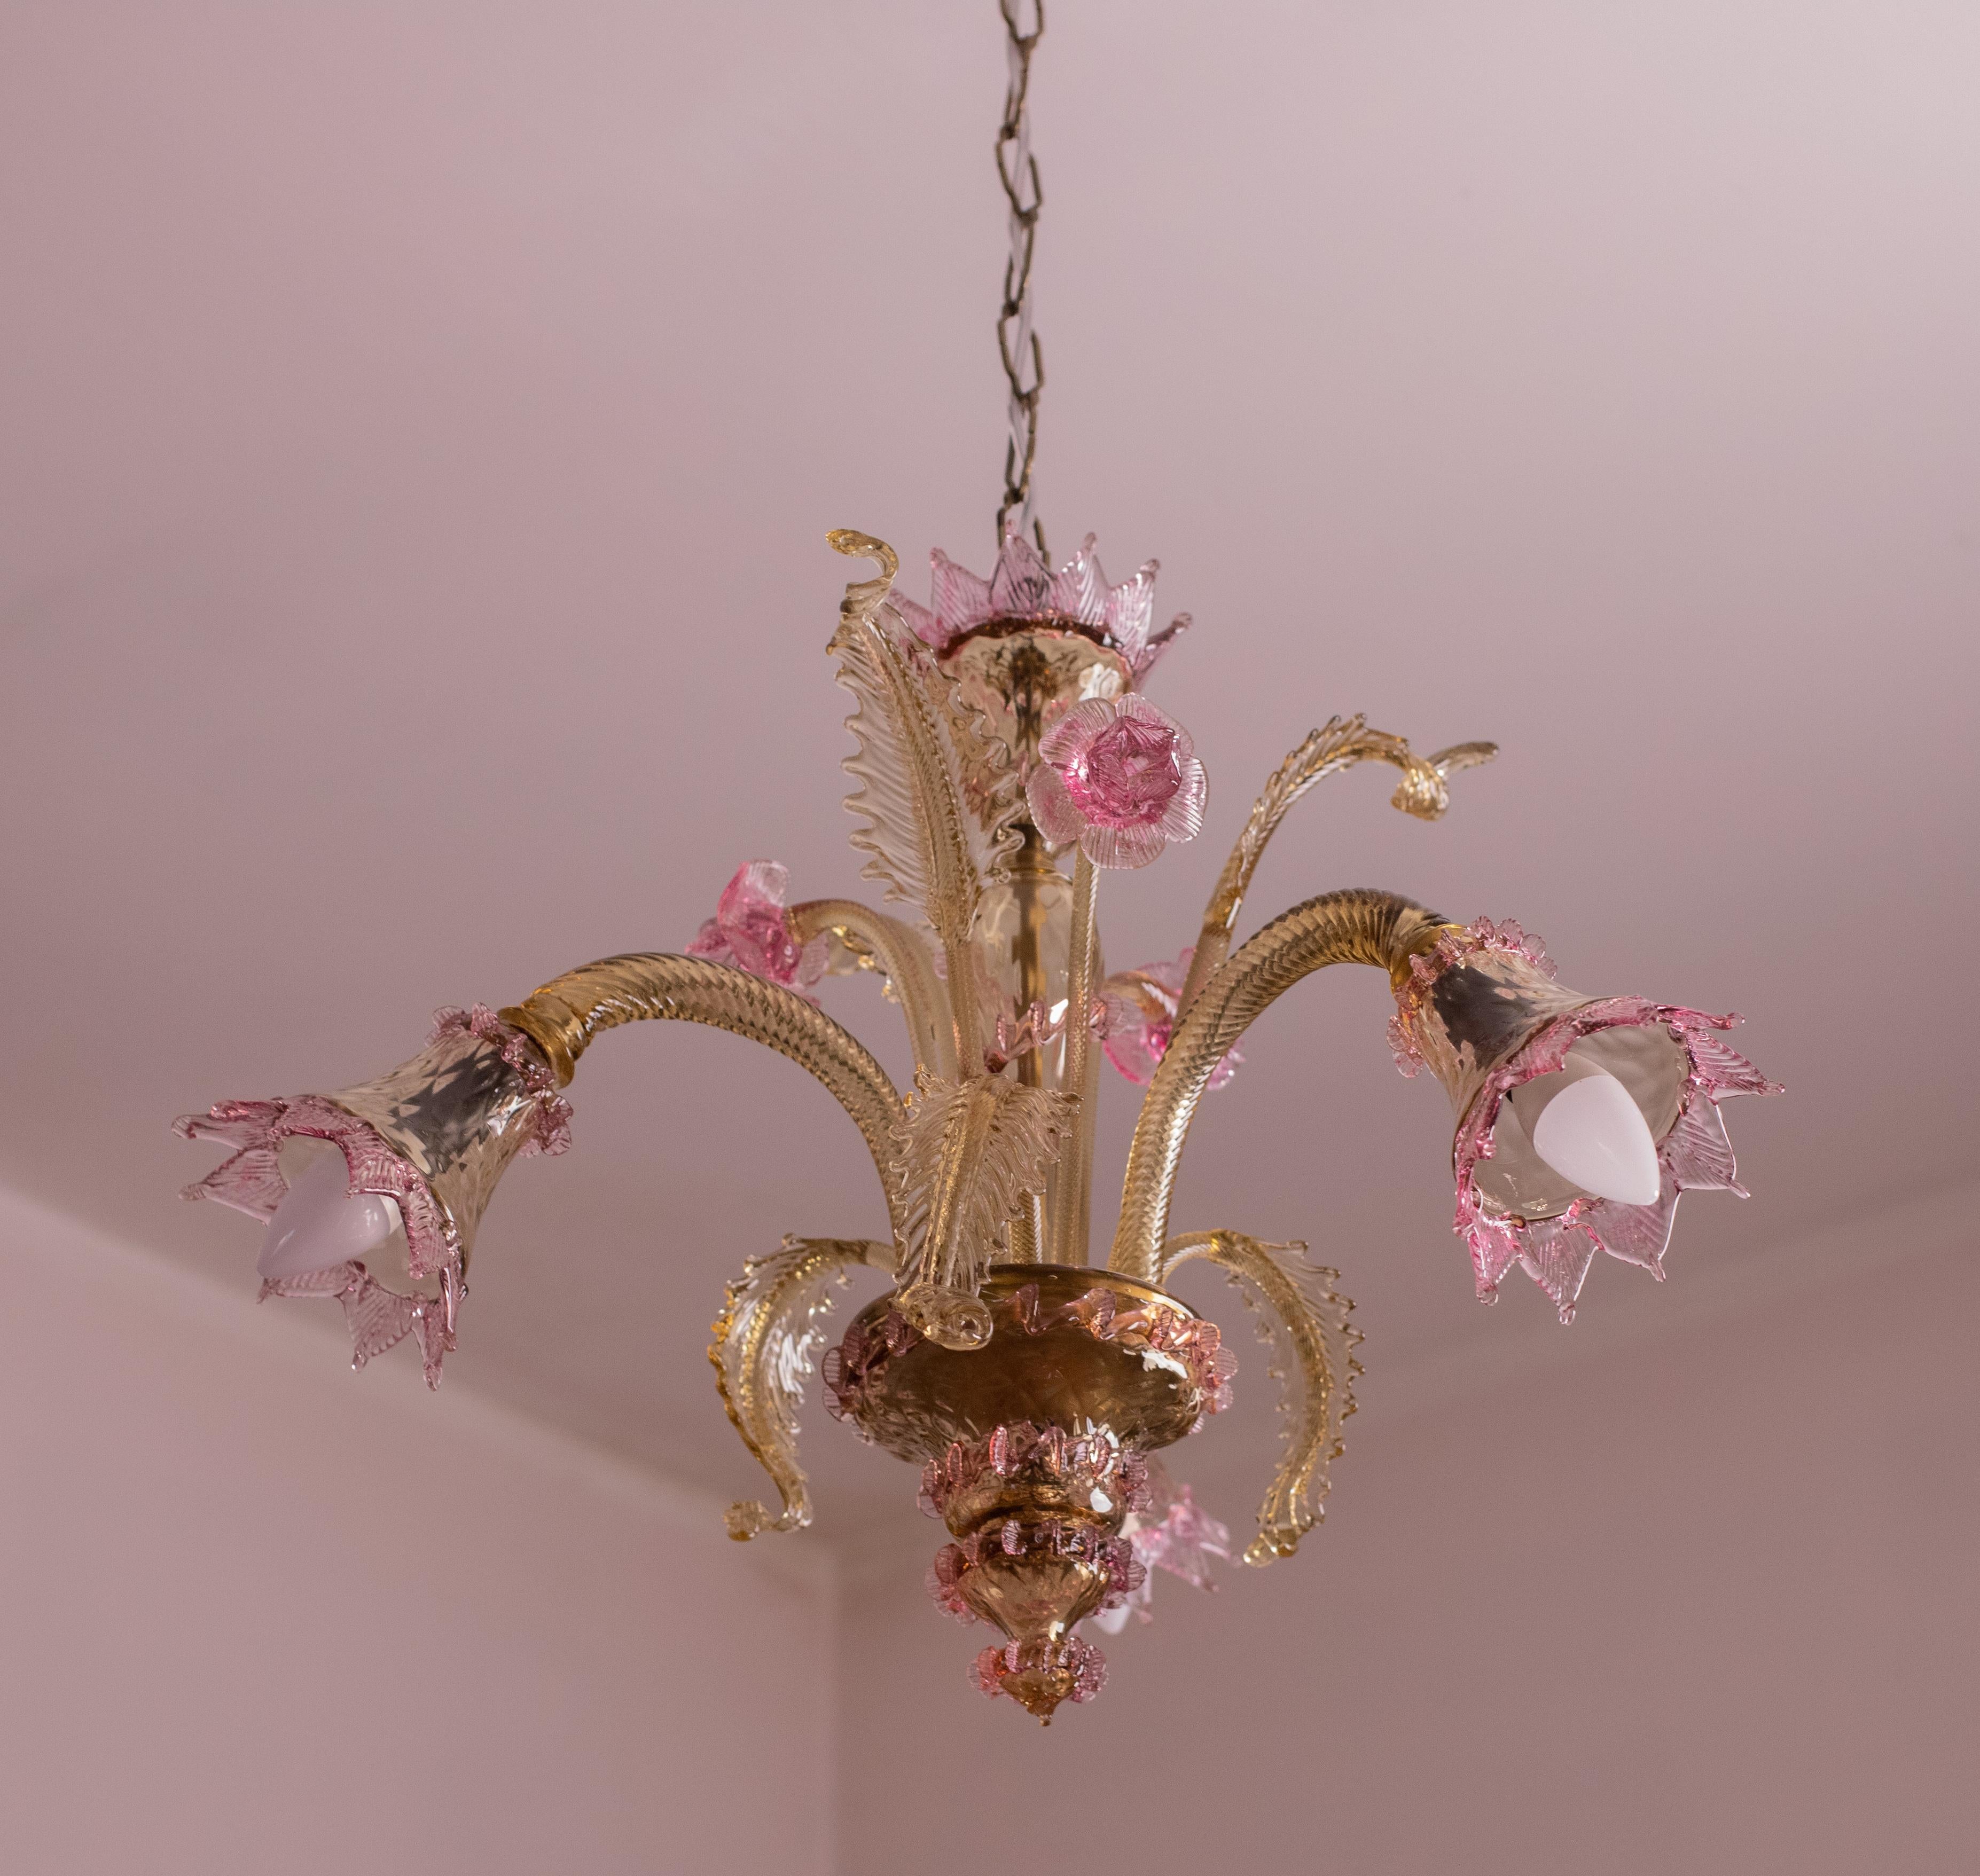 Pretty Murano chandelier, typical classic Venetian color ro

The chandelier has 3 arms that mount 3 e14 light points, European standards.

The fixture is full of leaves and flowers, 3 high leaves, 3 low leaves and 3 flowers.

The height